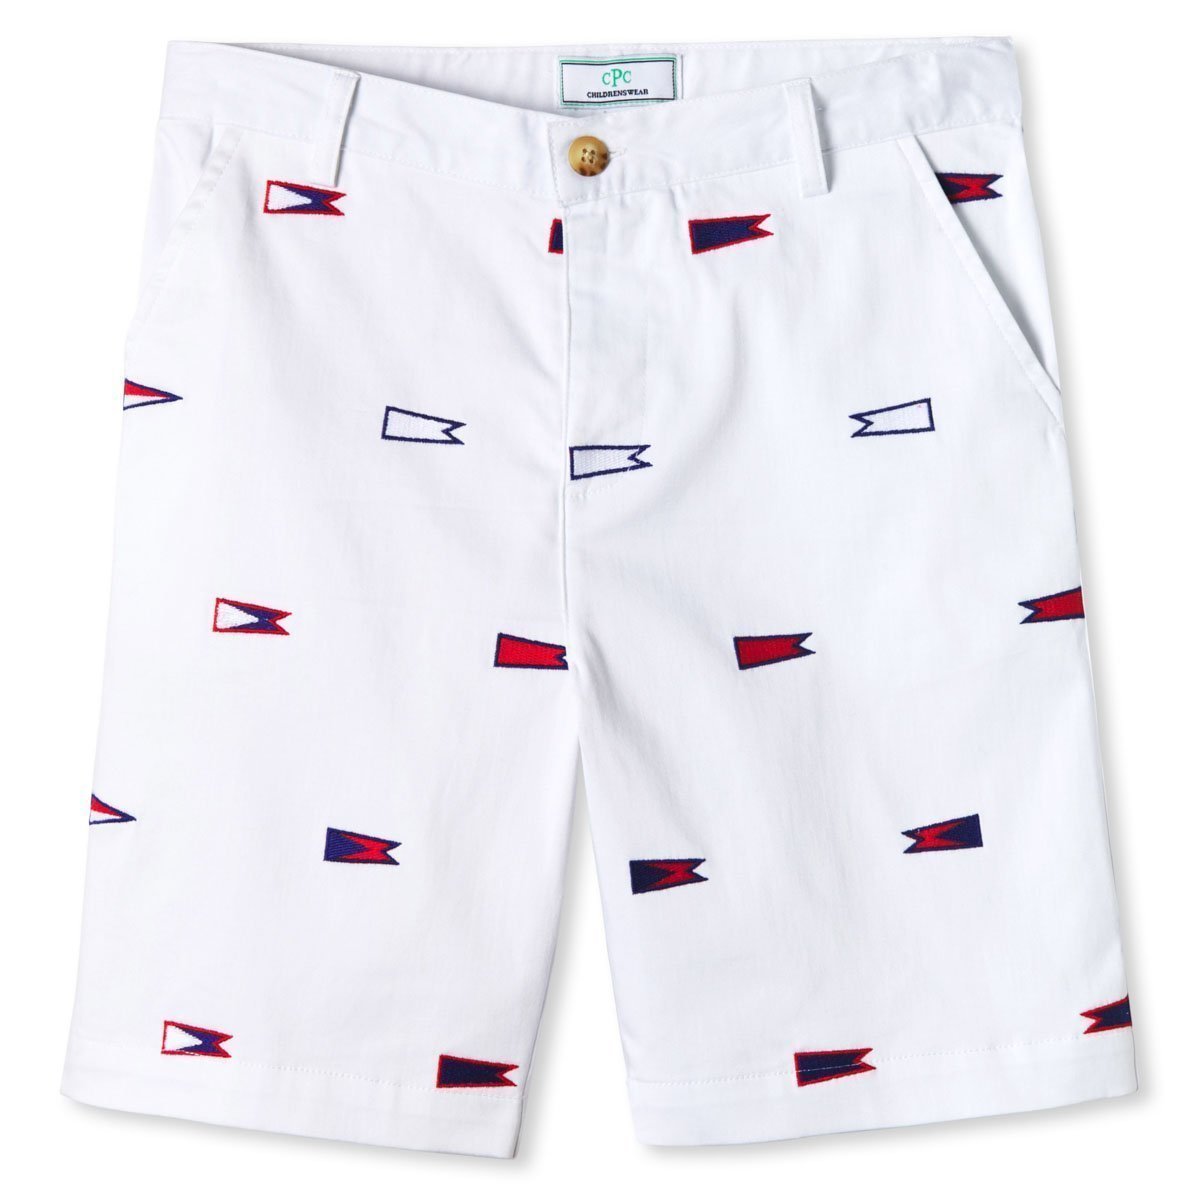 On The Go Classic White Shorts, Purple Door Boutique